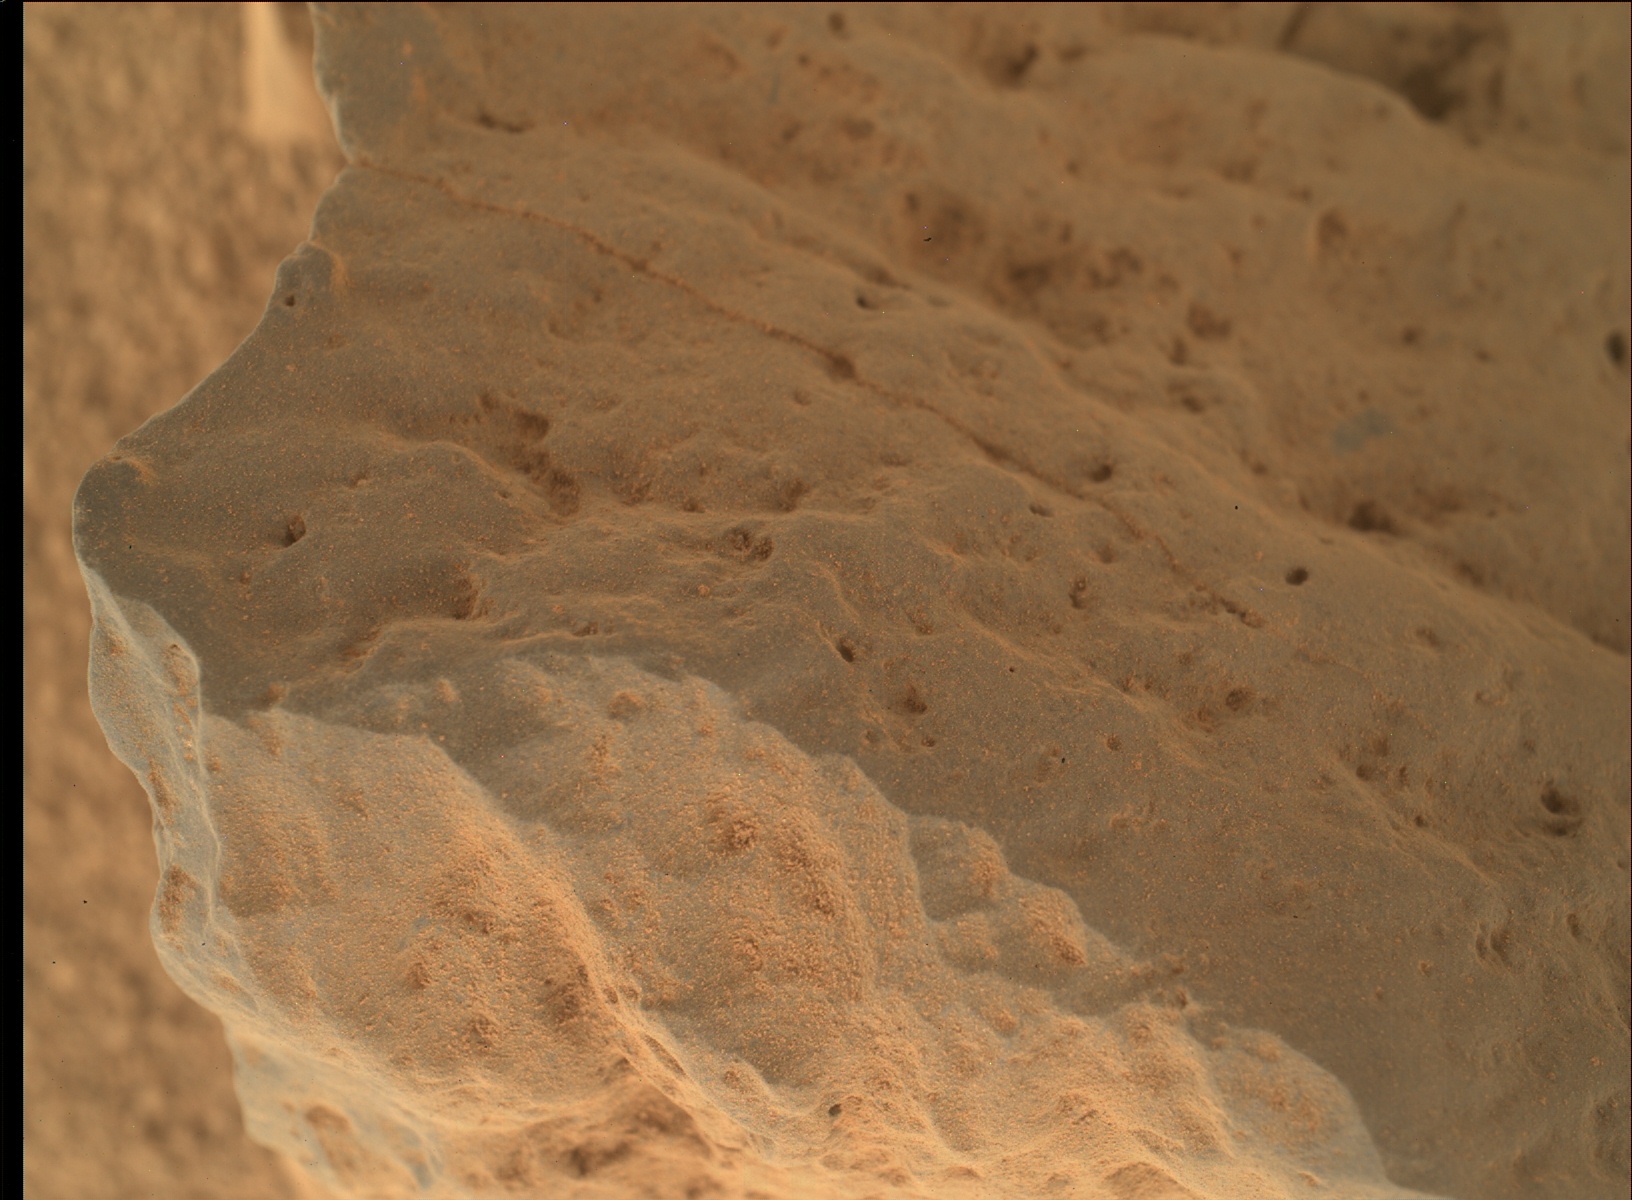 Nasa's Mars rover Curiosity acquired this image using its Mars Hand Lens Imager (MAHLI) on Sol 90